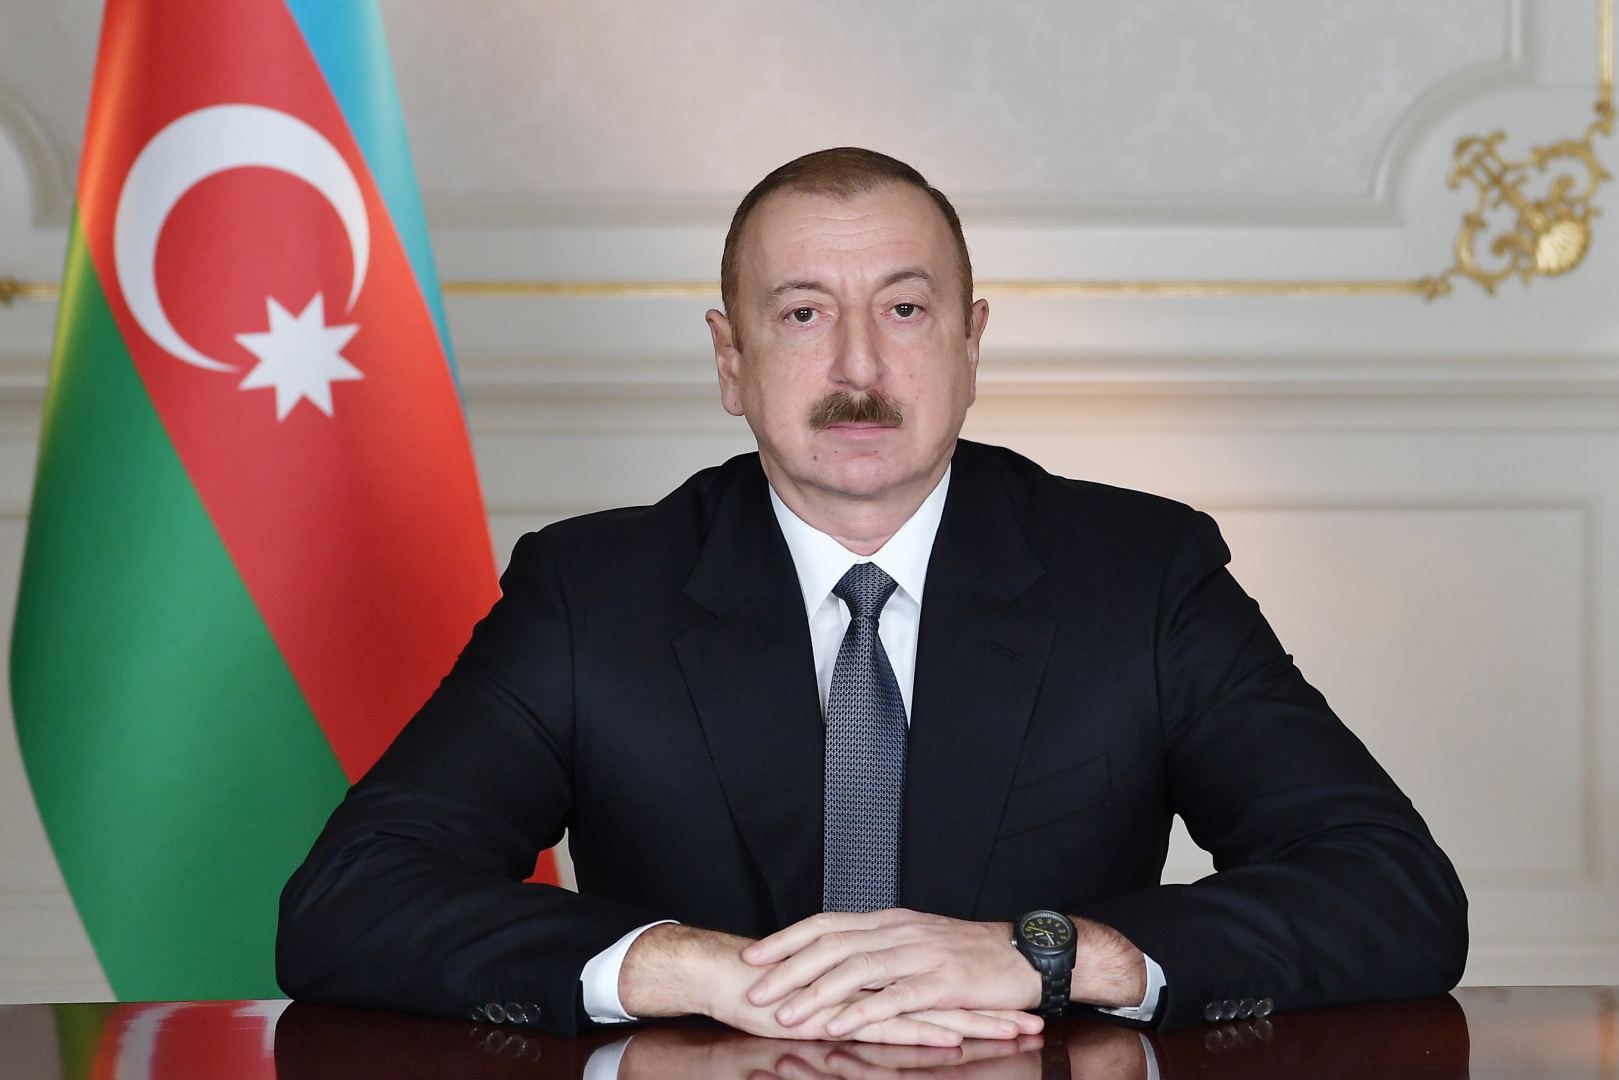 President Aliyev: Media controlled by Armenian lobby distorted essence of conflict